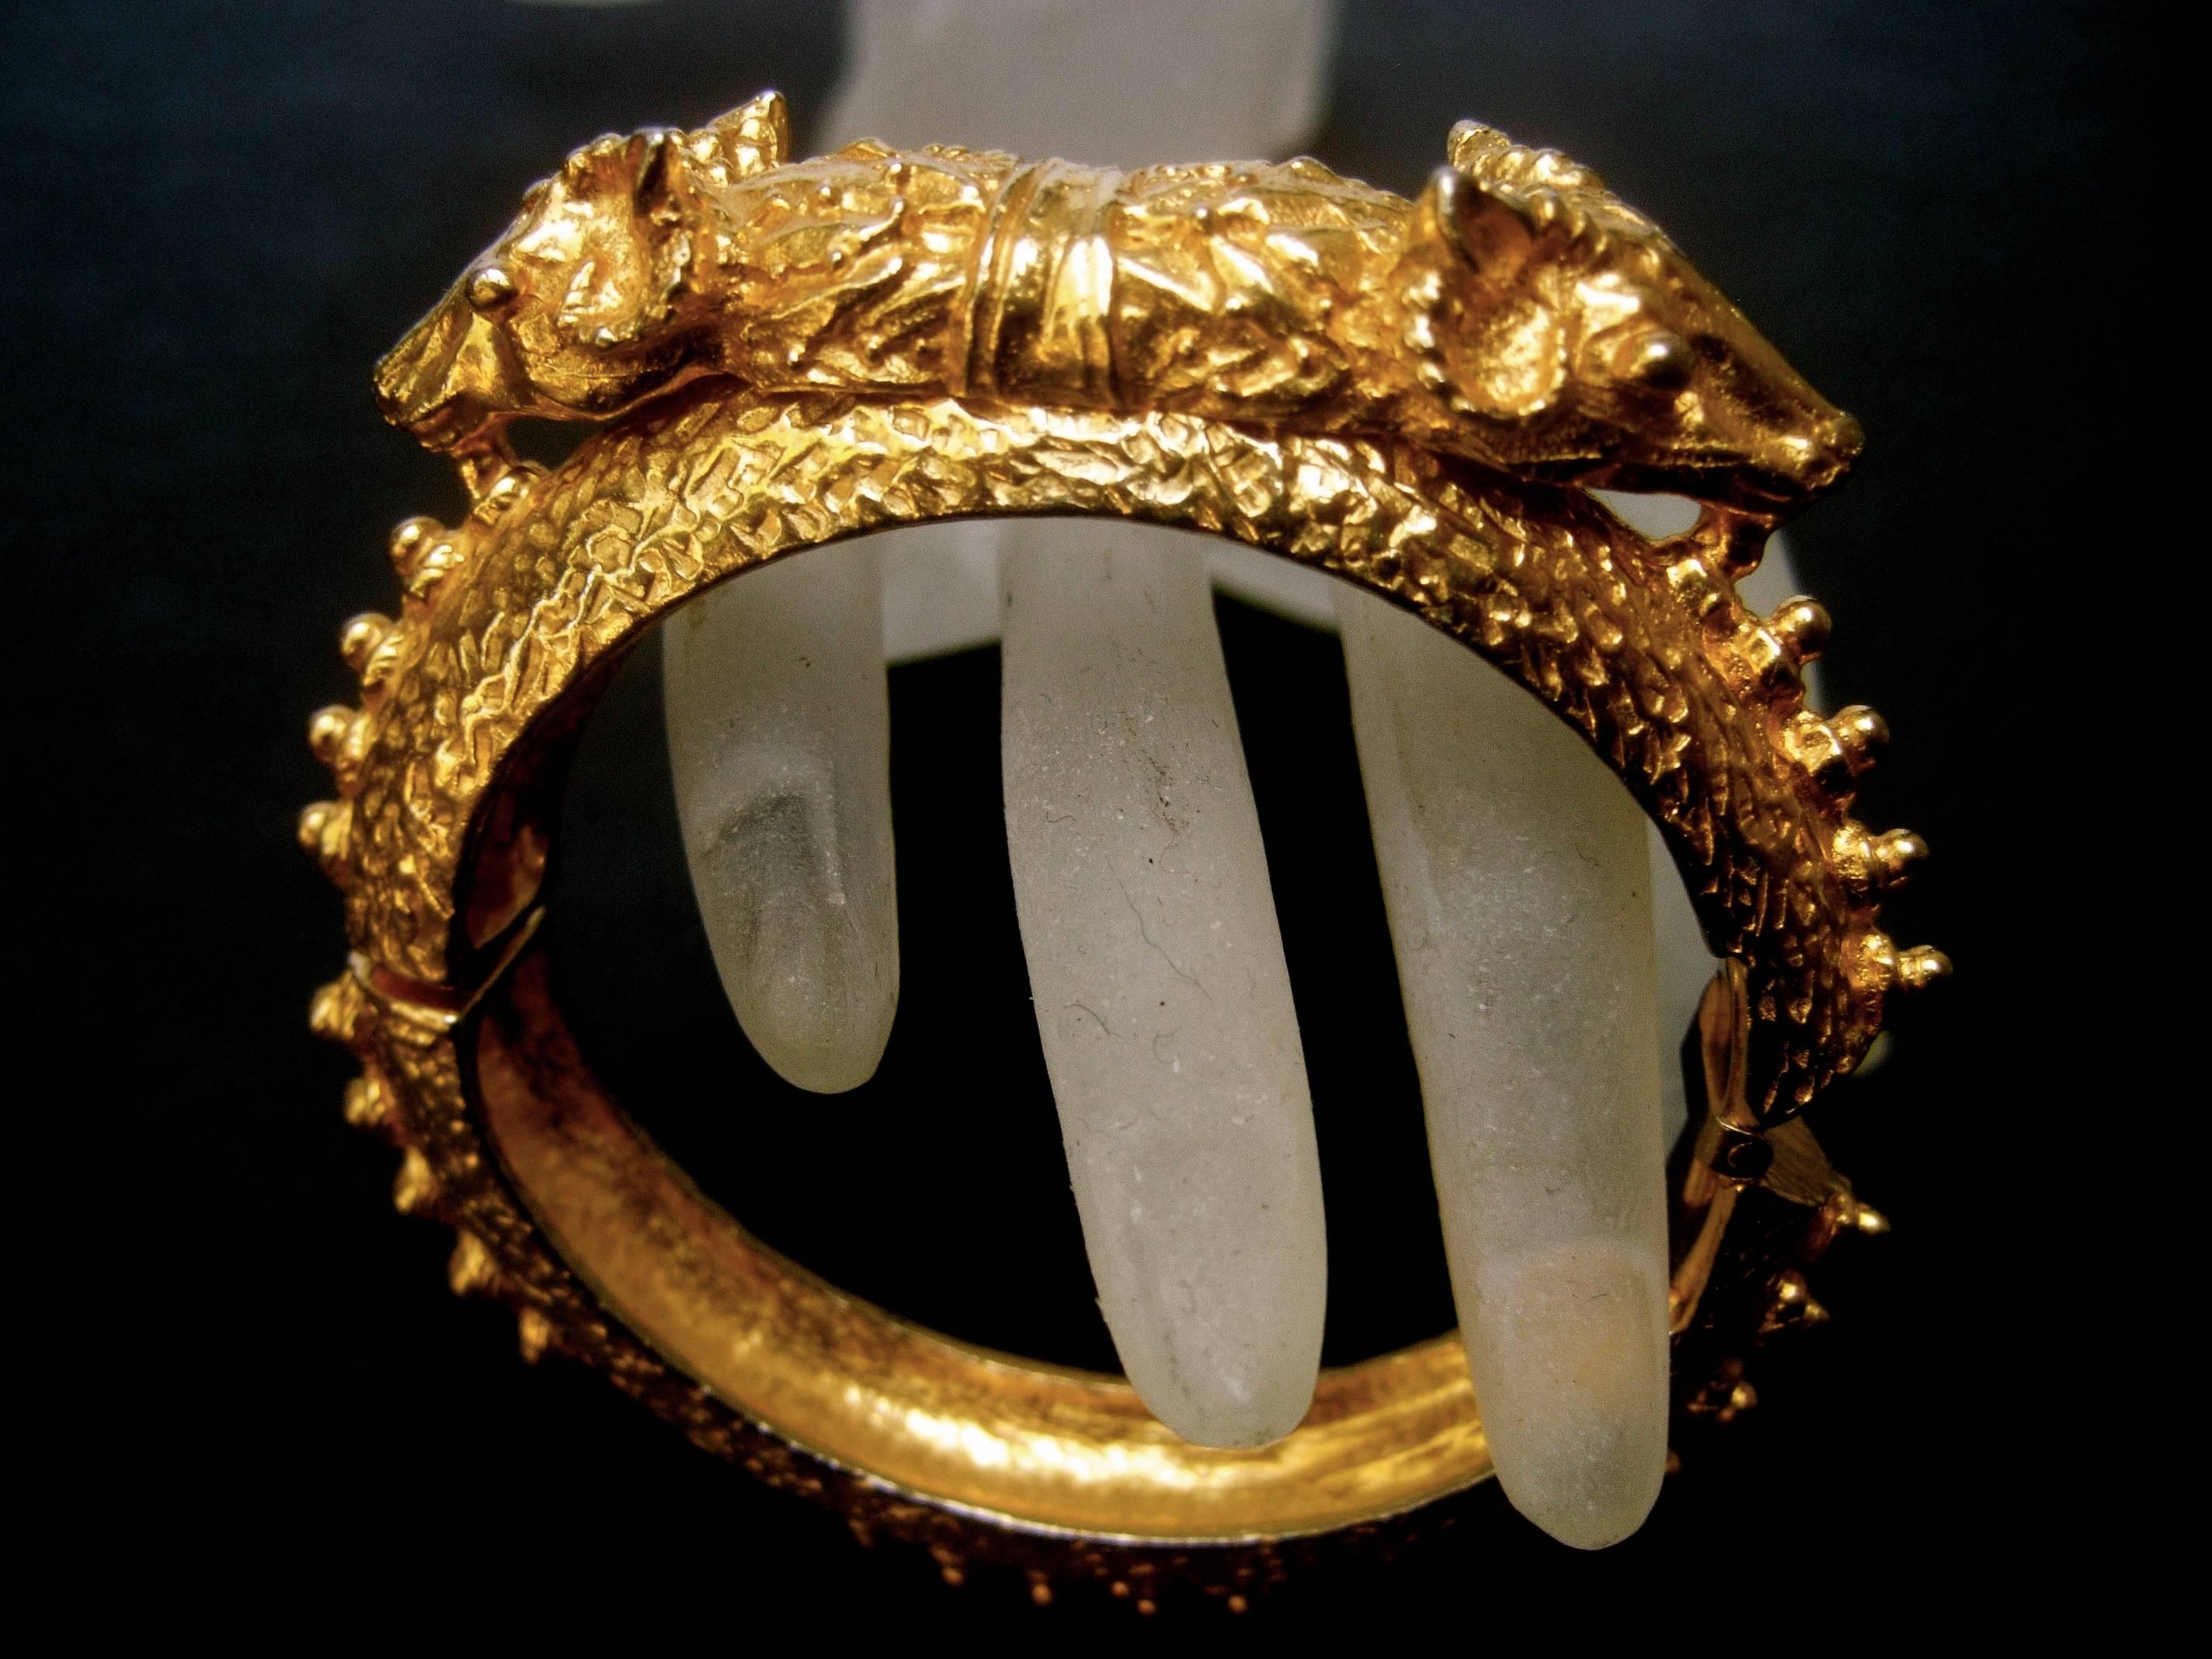 Alexis Kirk ornate gilt metal etruscan style hammered hinged bracelet 
The heavy gilt metal bracelet is designed with a pair of stylized
rams heads at the center

Circling the bracelet band are a series of spike grommets
The interior is stamped